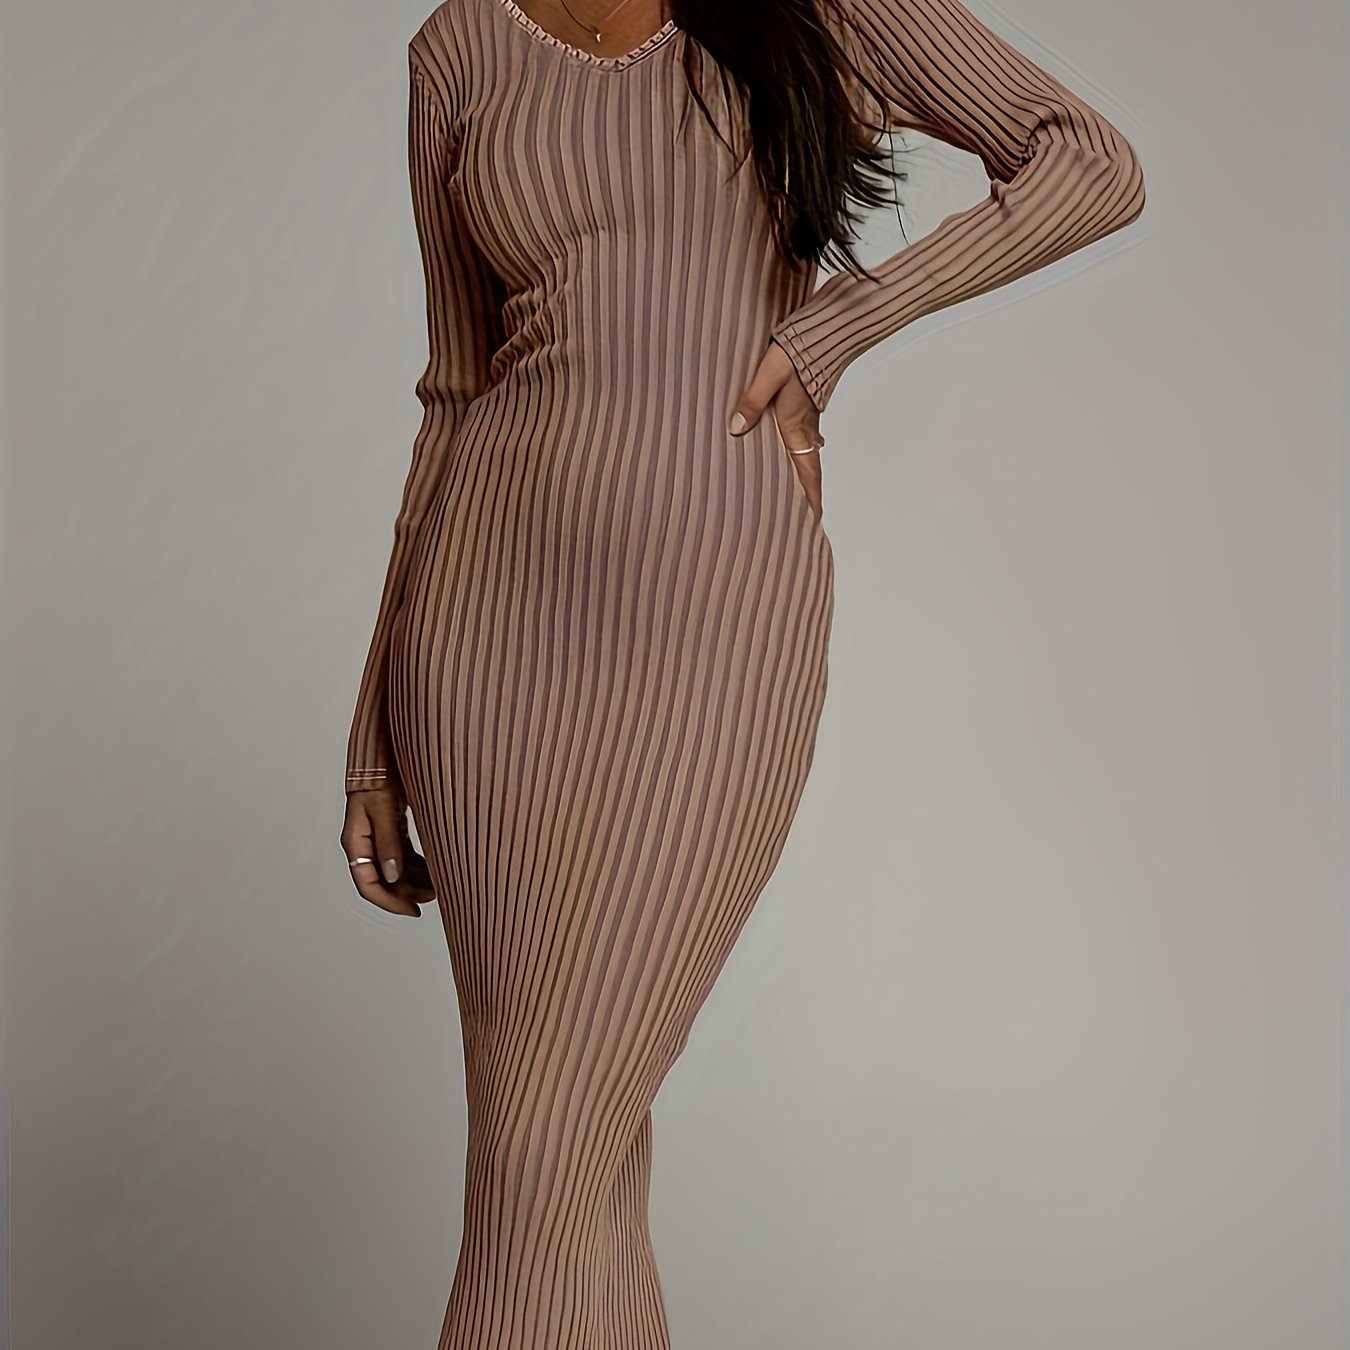 Antmvs Bodycon V-neck Solid Dress, Long Sleeve Dress For Spring & Fall, Women's Clothing